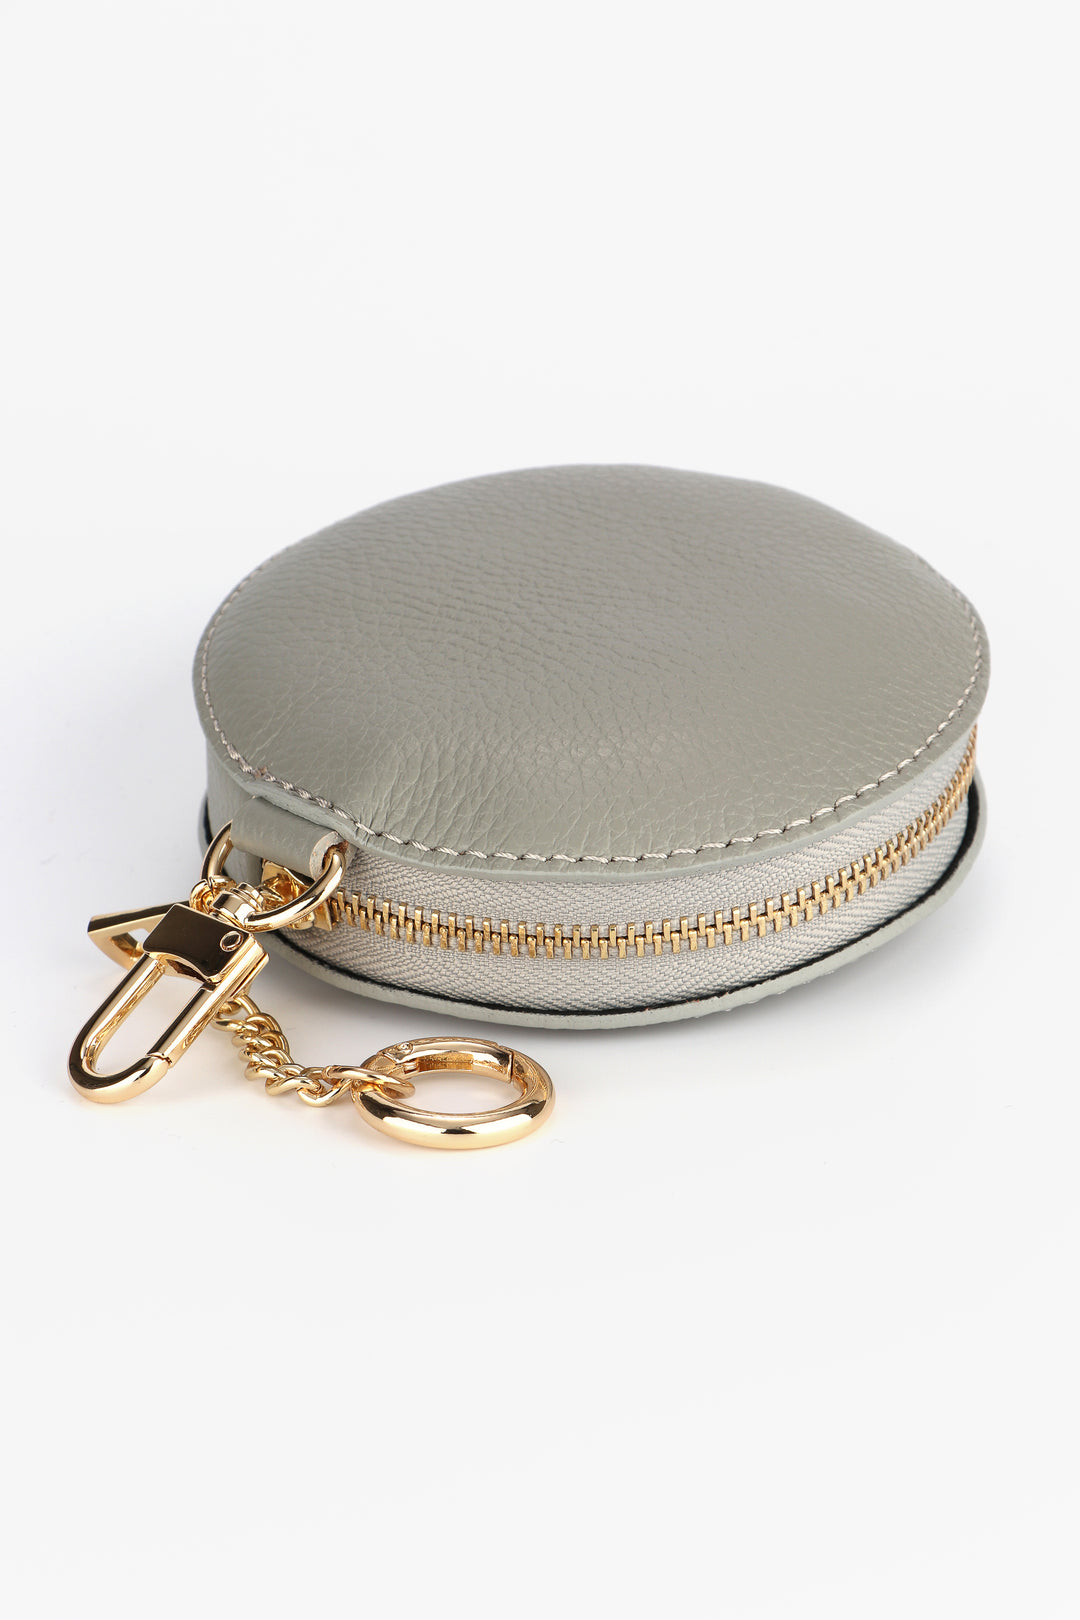 light grey round leather coin purse with a secure zip closure and gold hardware